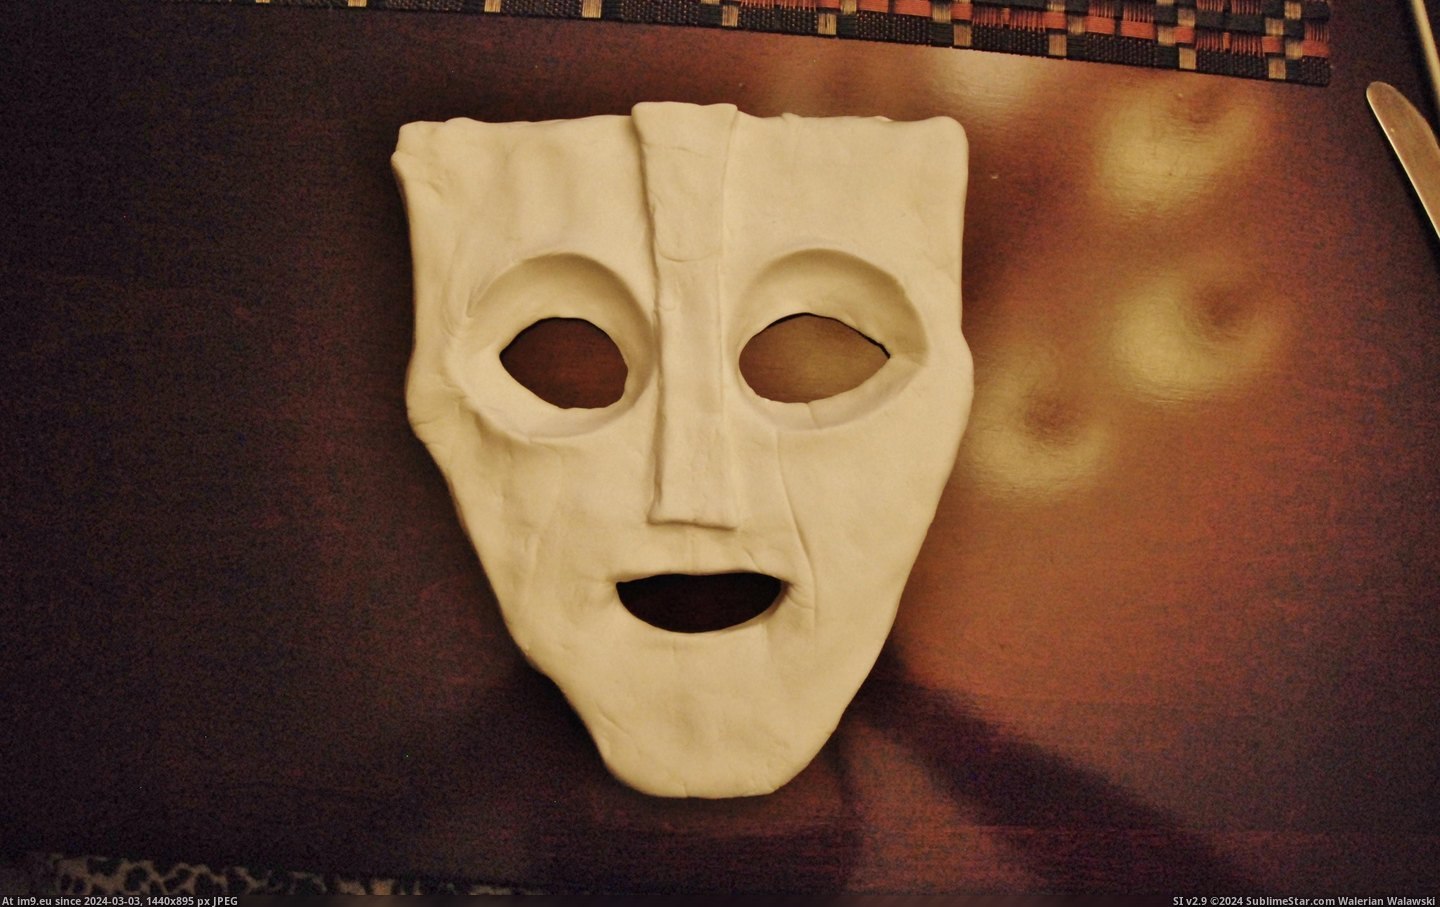 #Movie #Wanted #Stores #Superheroes #Manag #Son #Mask [Pics] My son wanted the mask from the movie the Mask, but it's all superheroes in stores these days so I made it for him. Manag Pic. (Image of album My r/PICS favs))